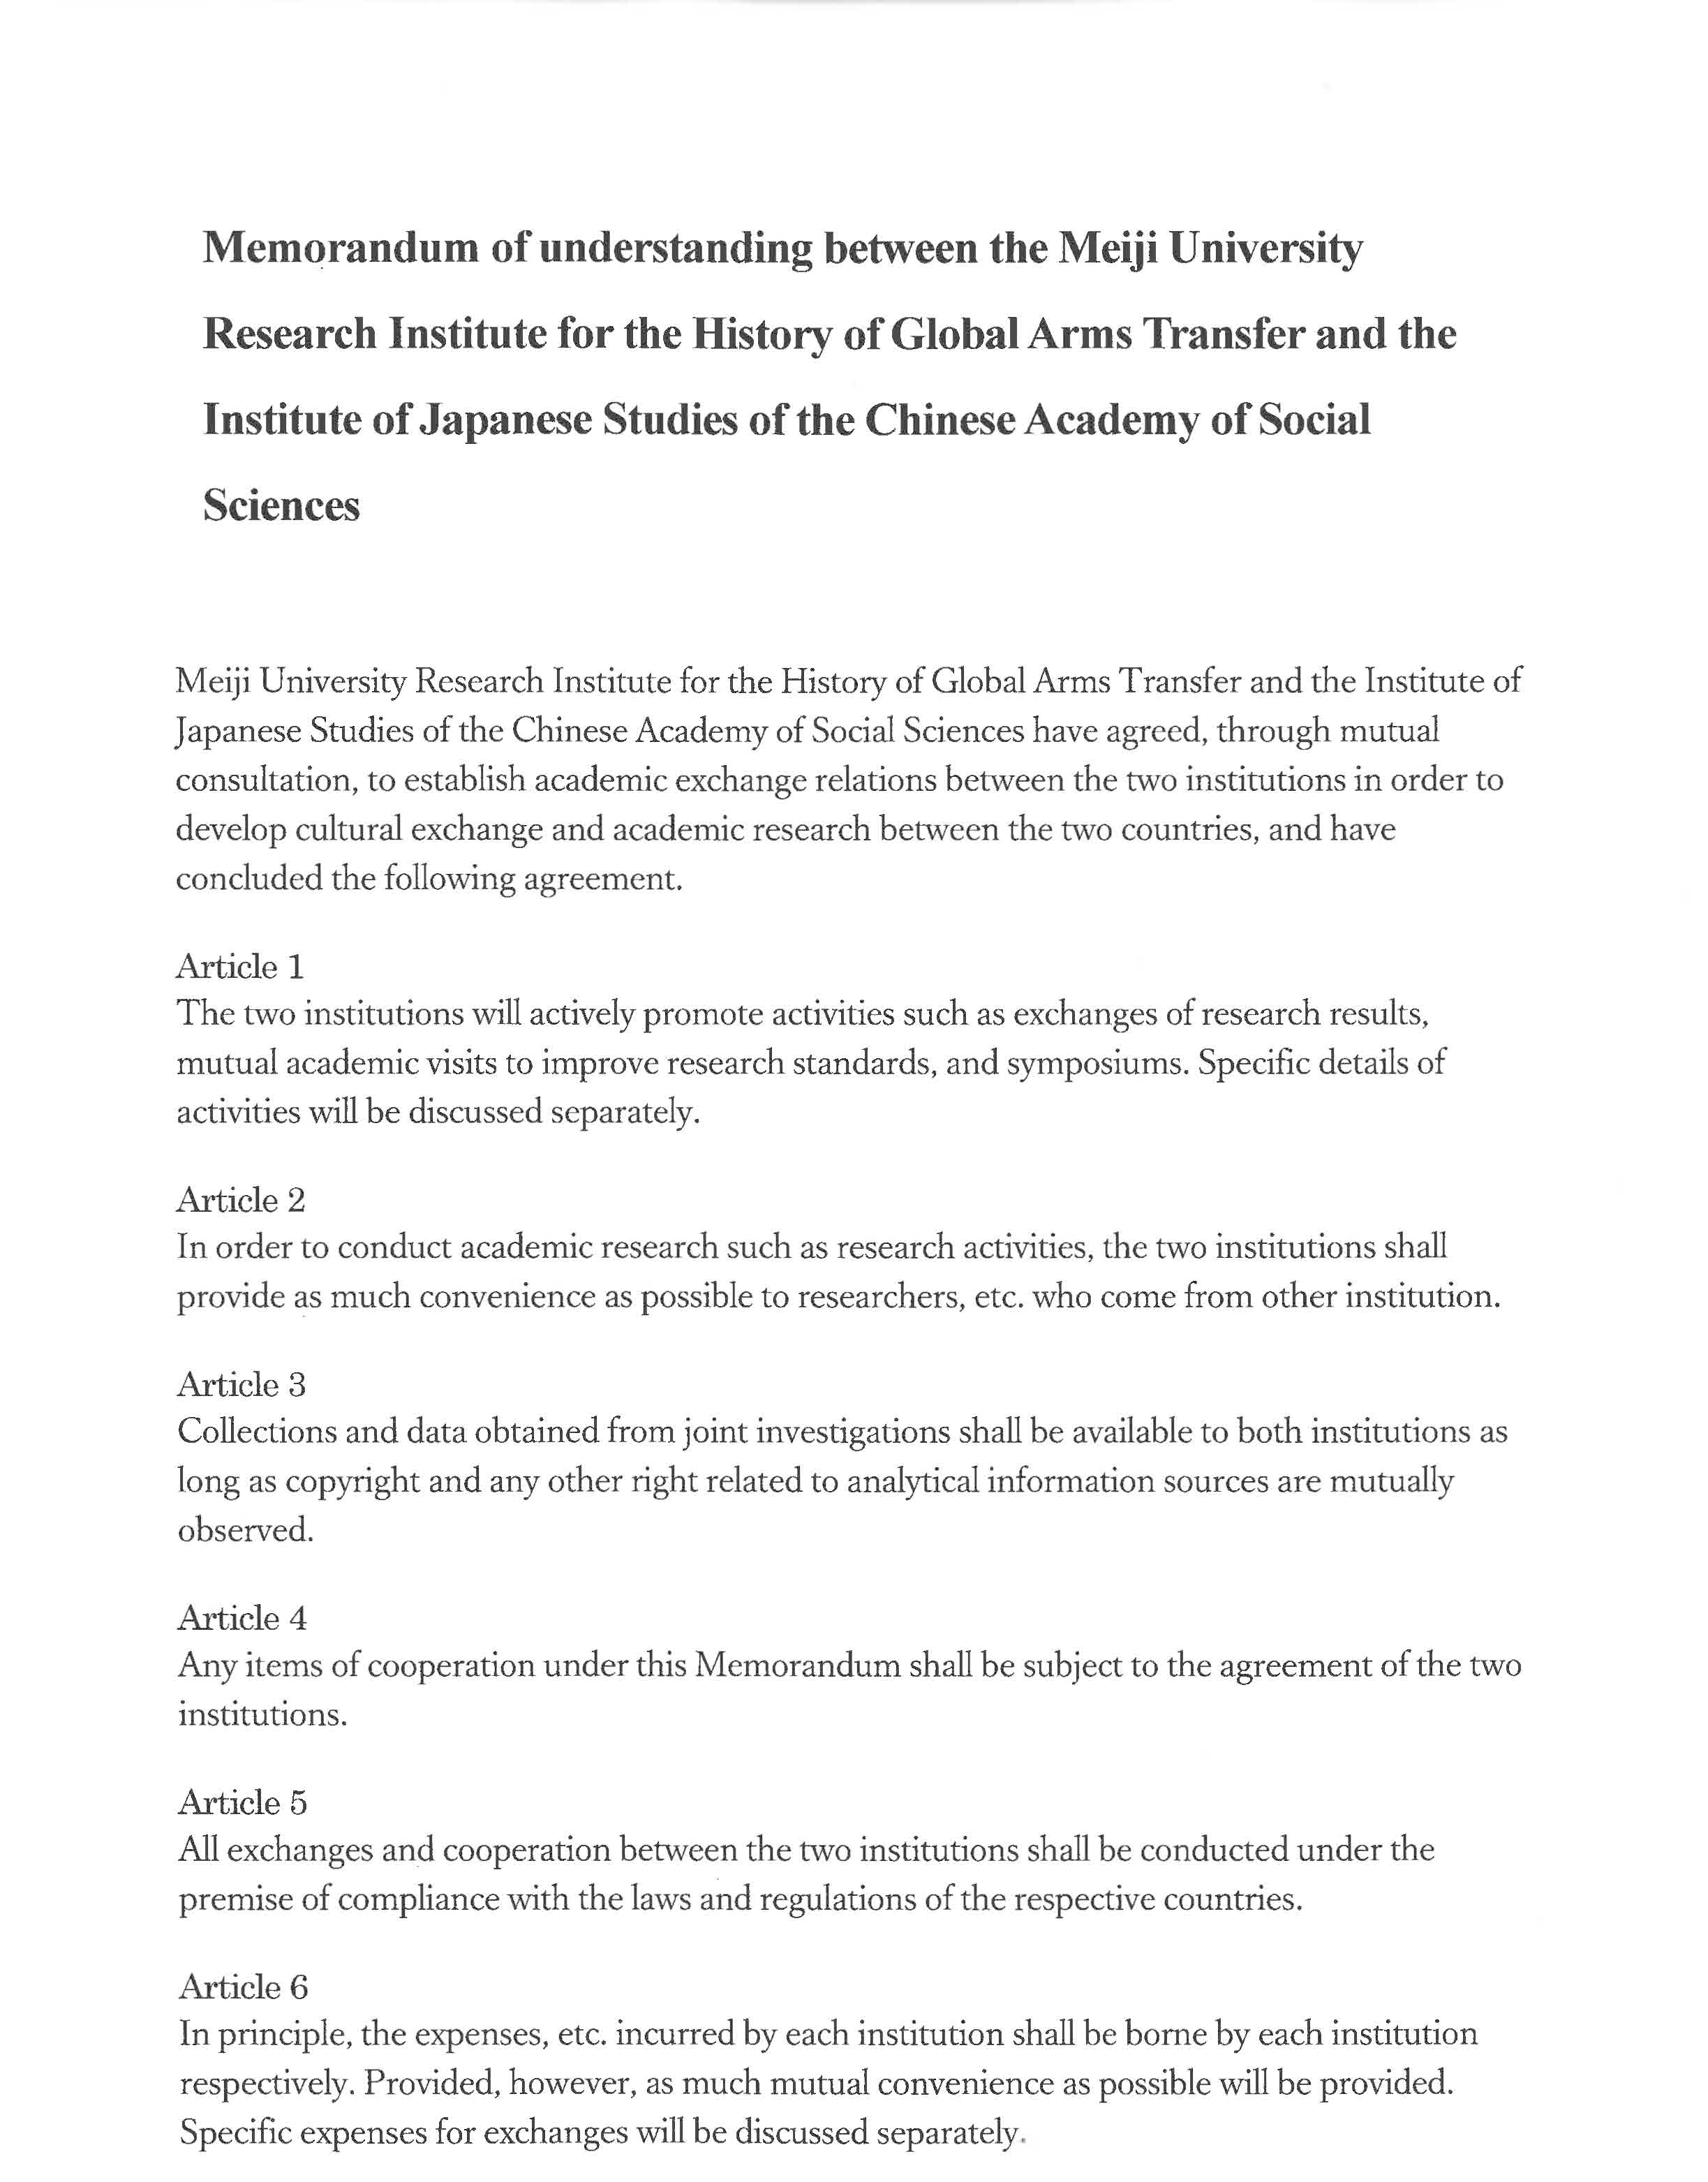 Memorandum of understanding between the Meiji University Research Institute for the History of Global Arms Transfer and the Institute of Japanese Studies of the Chinese Academy of Social Sciences 01